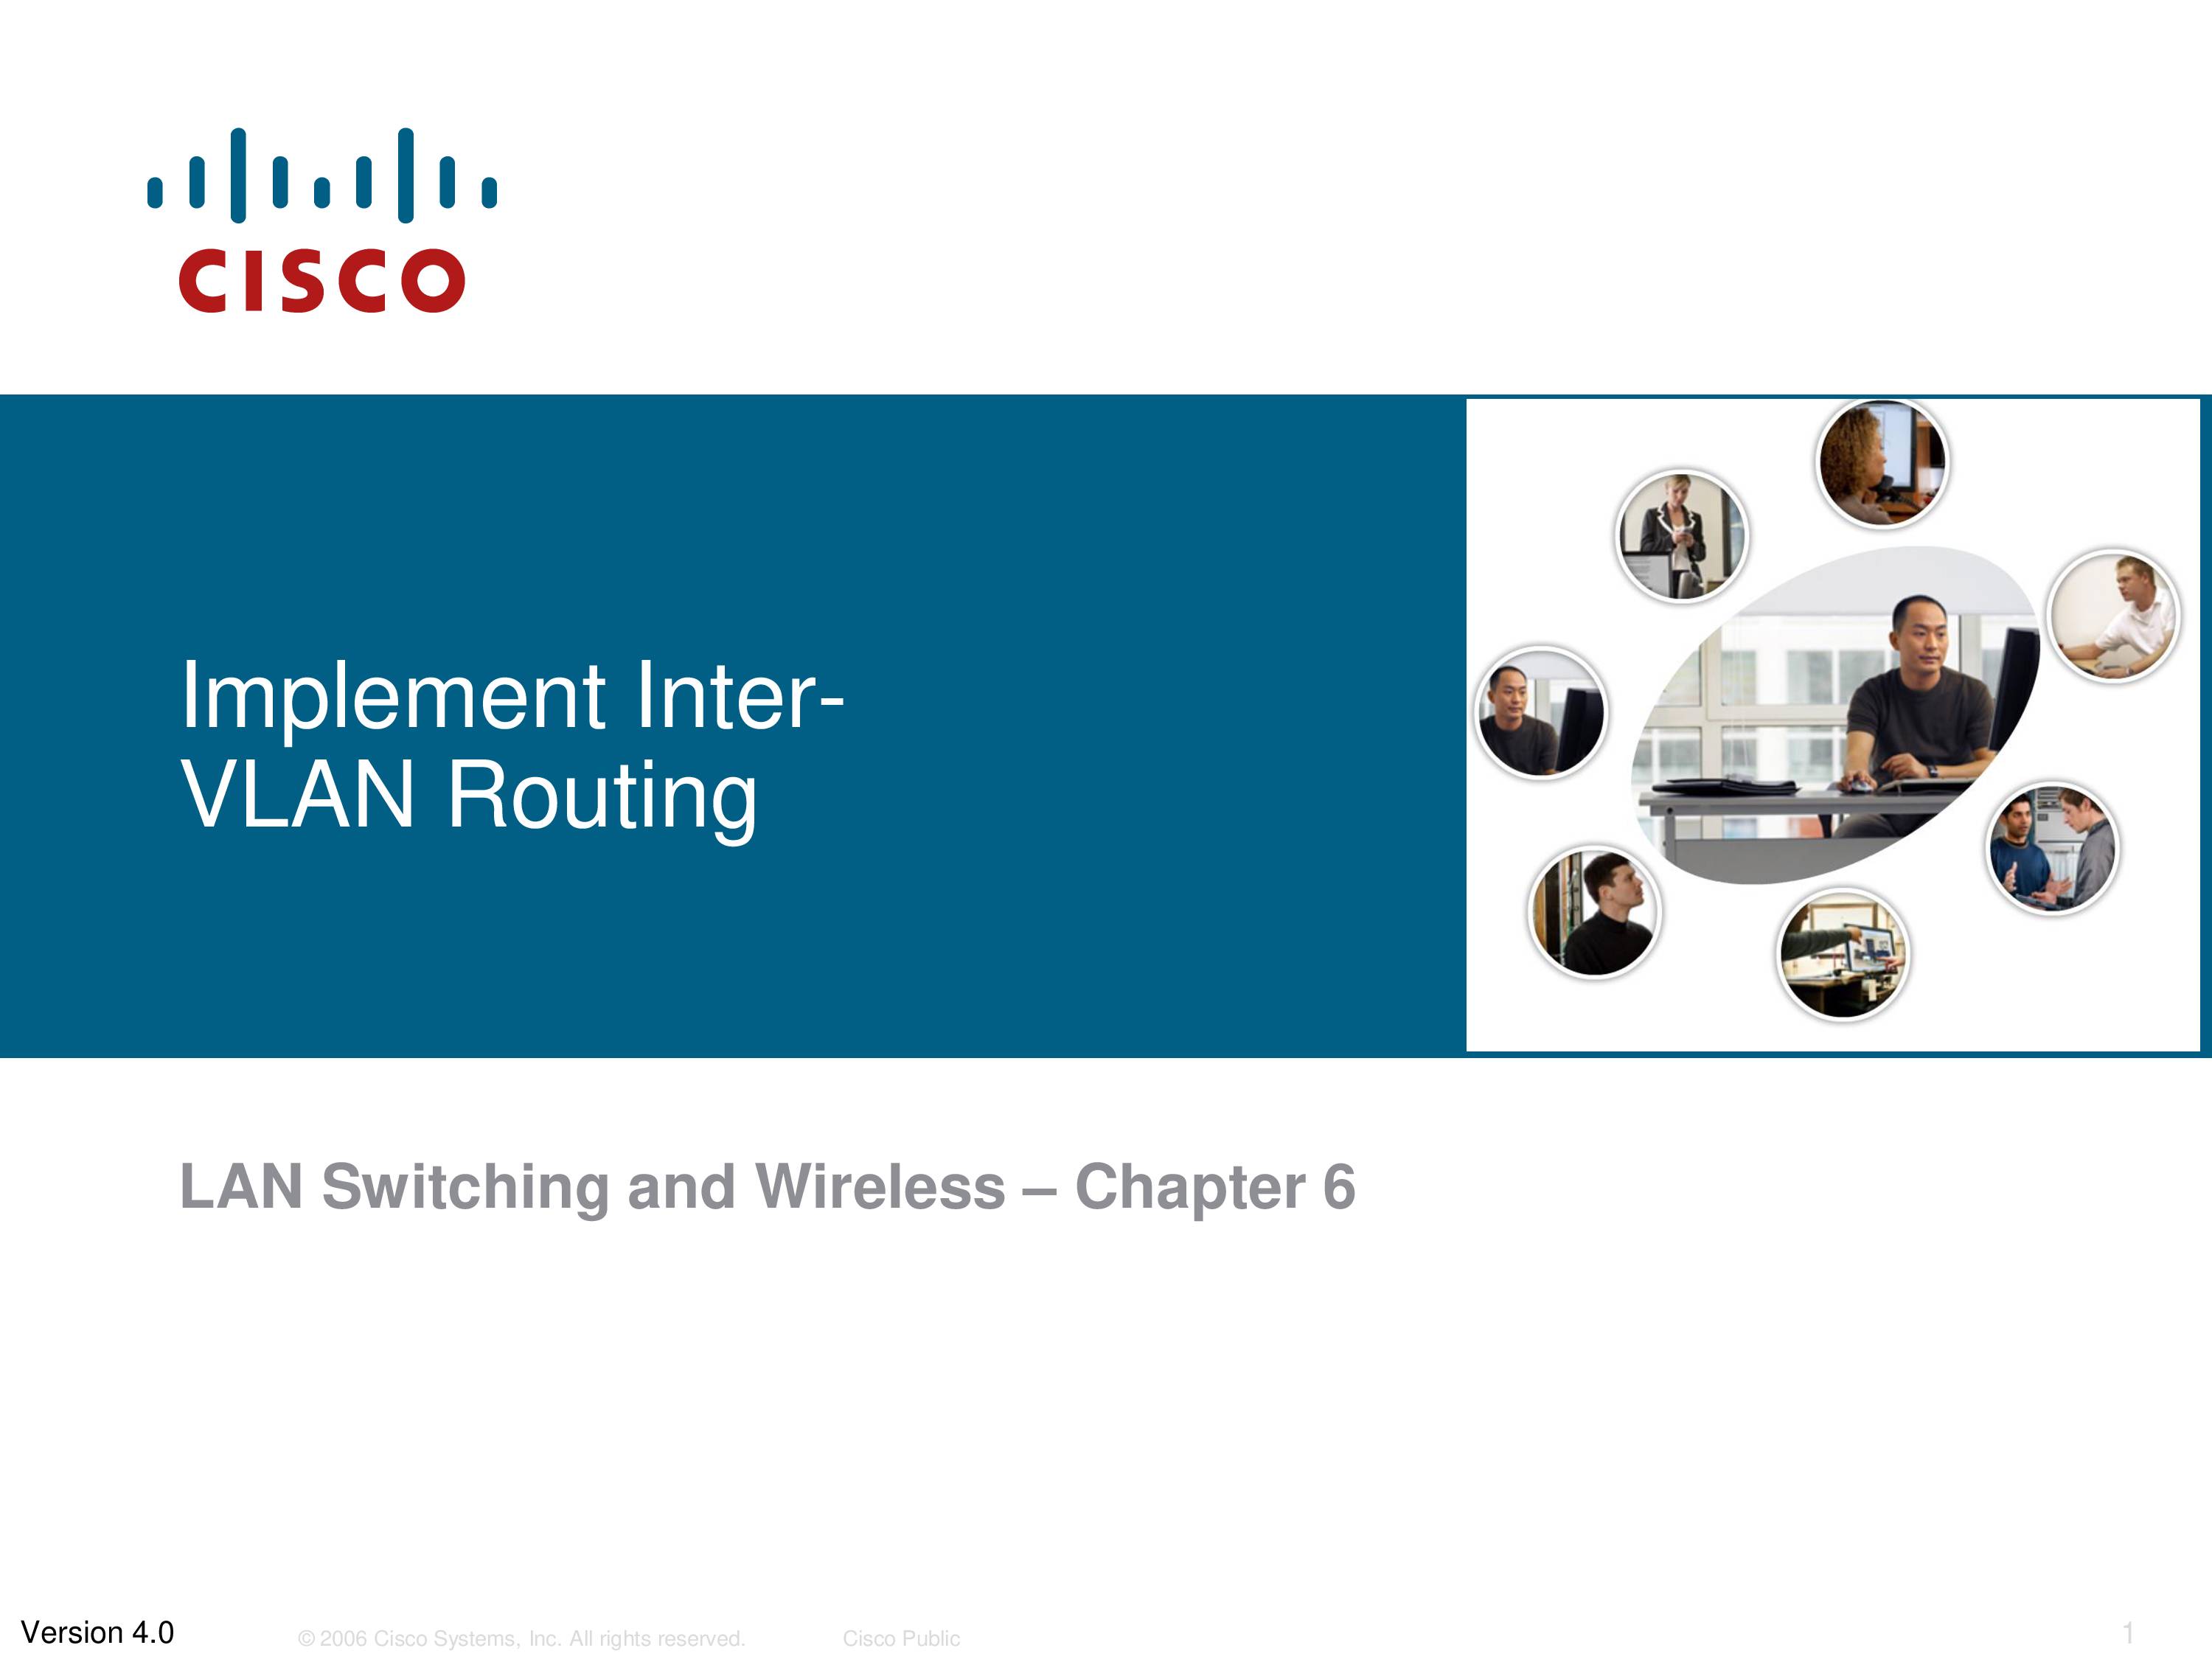 PPT On Implement Inter-VLAN Routing